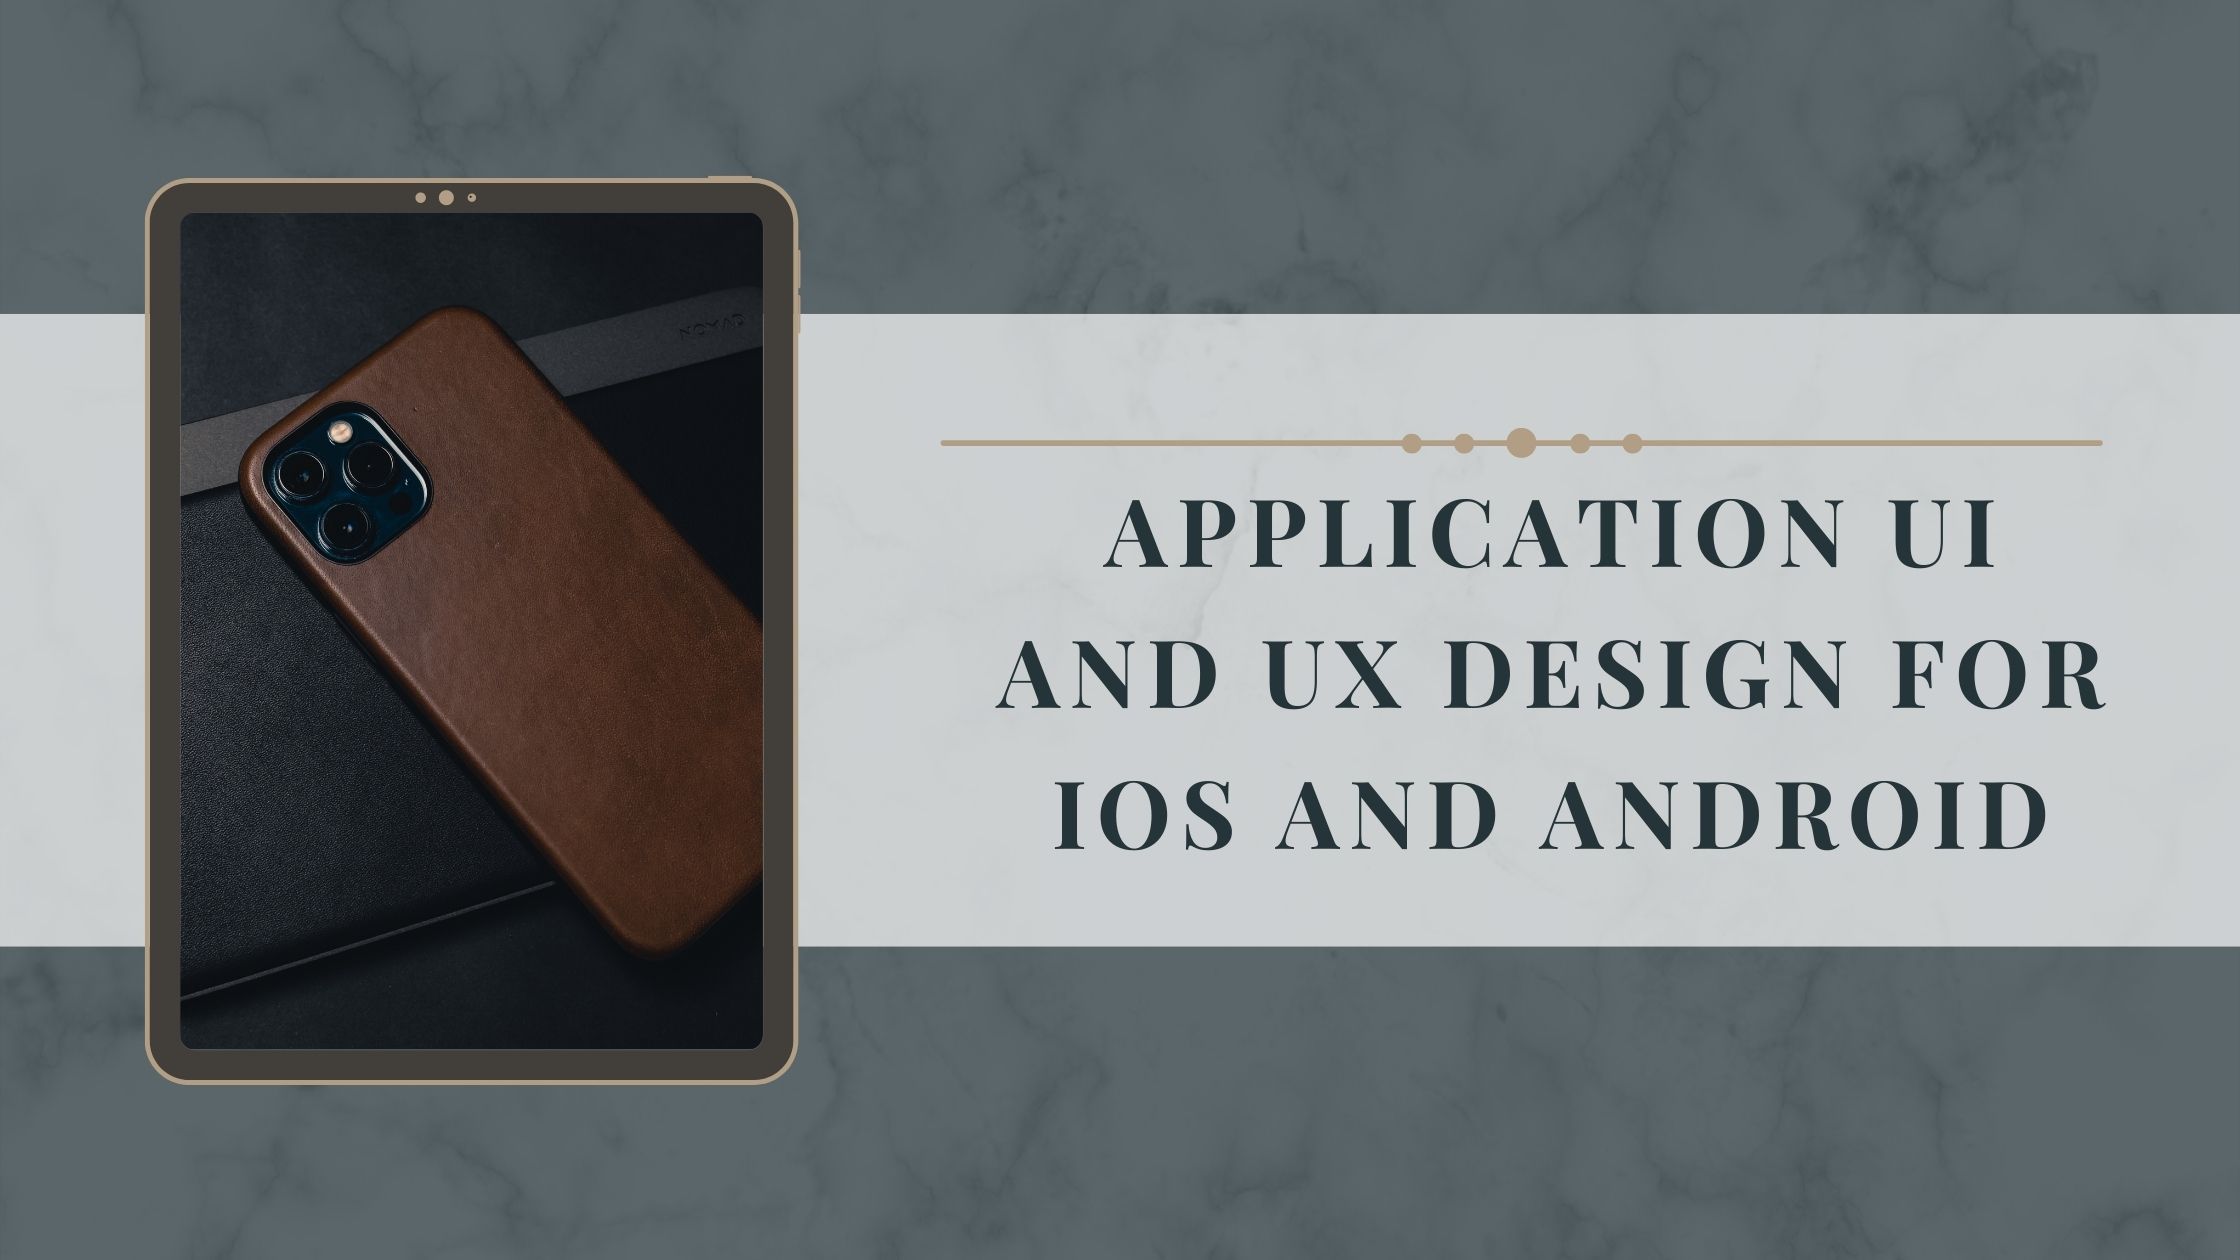 Application UI and UX Design for iOS and Android